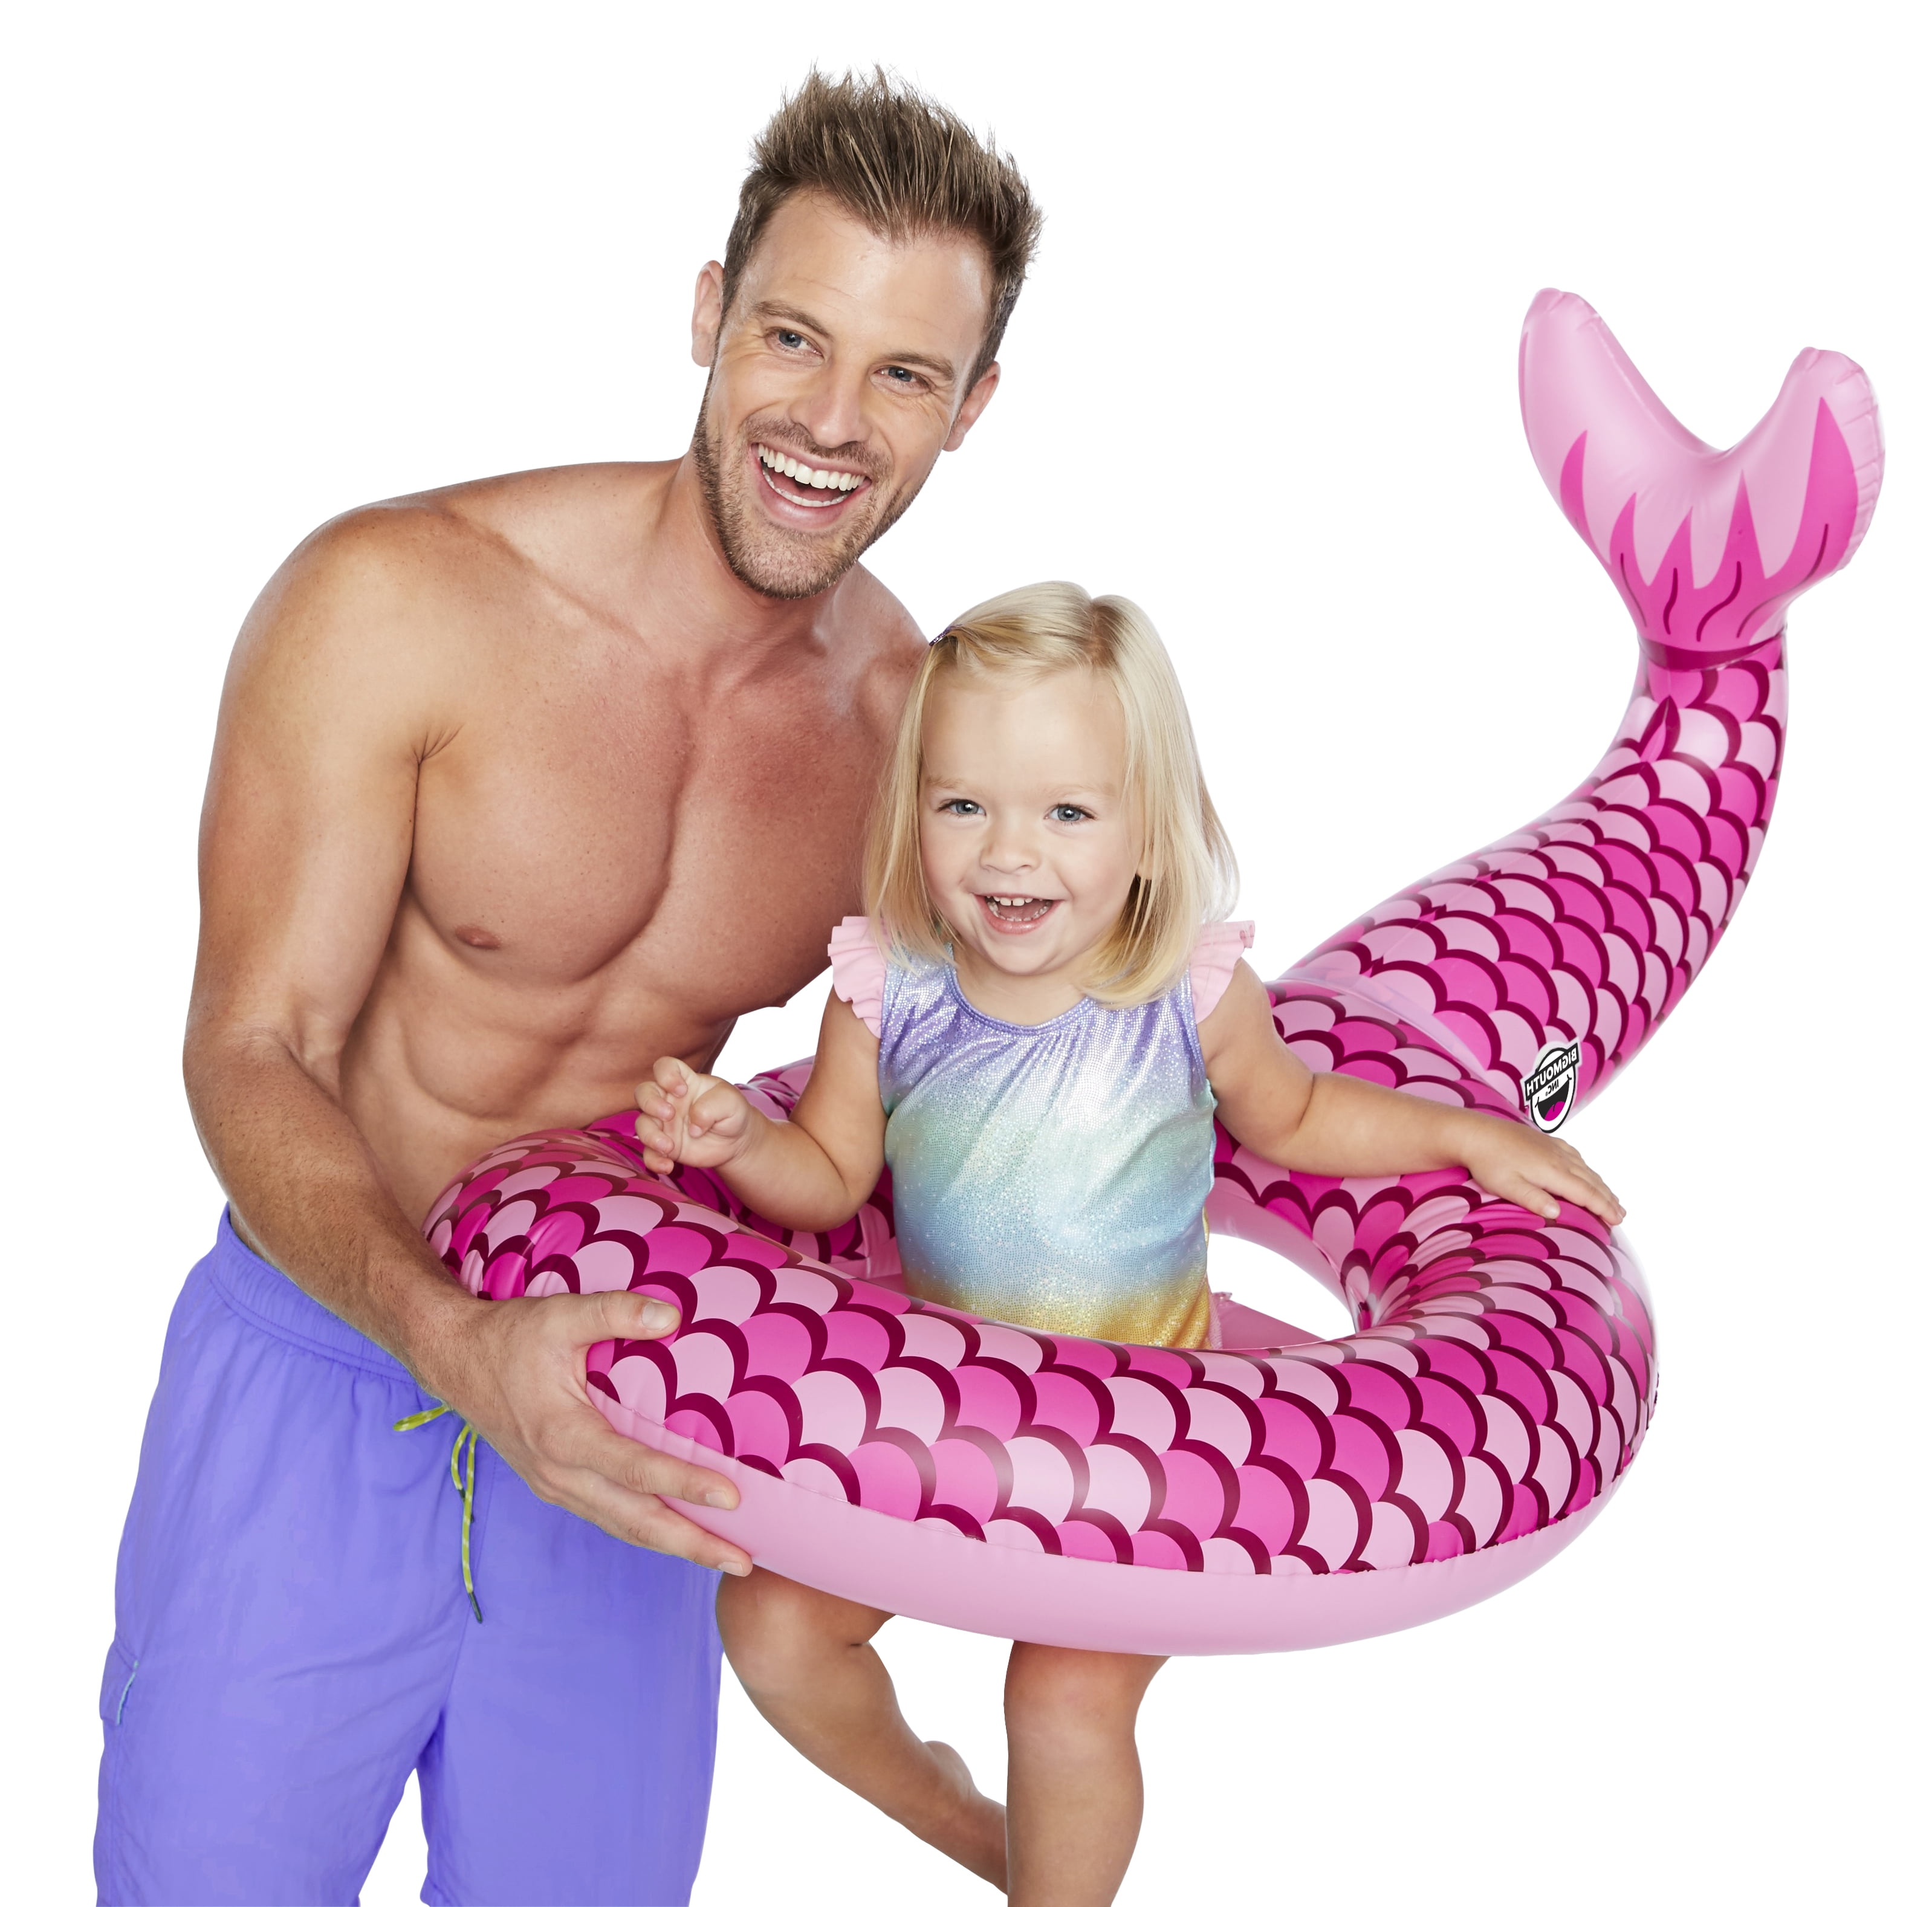 NEW Details about   BigMouth Inc Petite Pineapple Pool Float for Infants/Kids Ages 1-3 